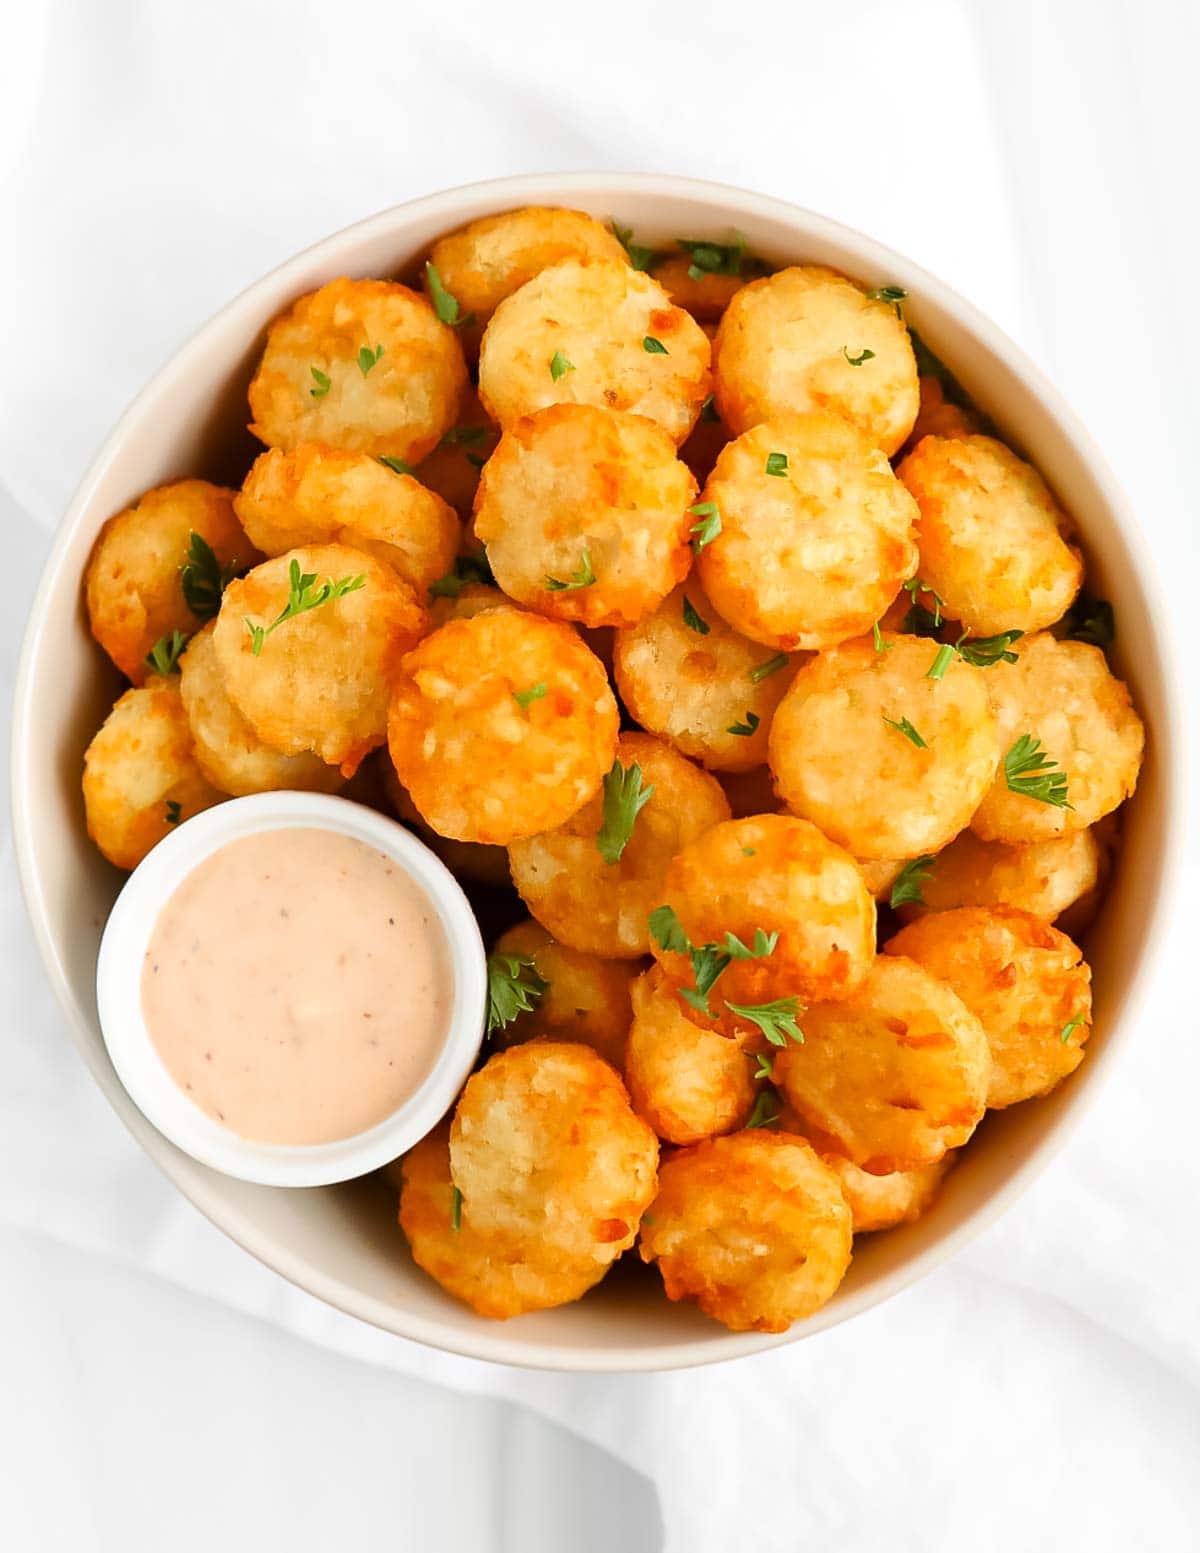 A white bowl filled with cooked tater tots and a small bowl of spicy ranch dressing. There is fresh parsley on top.